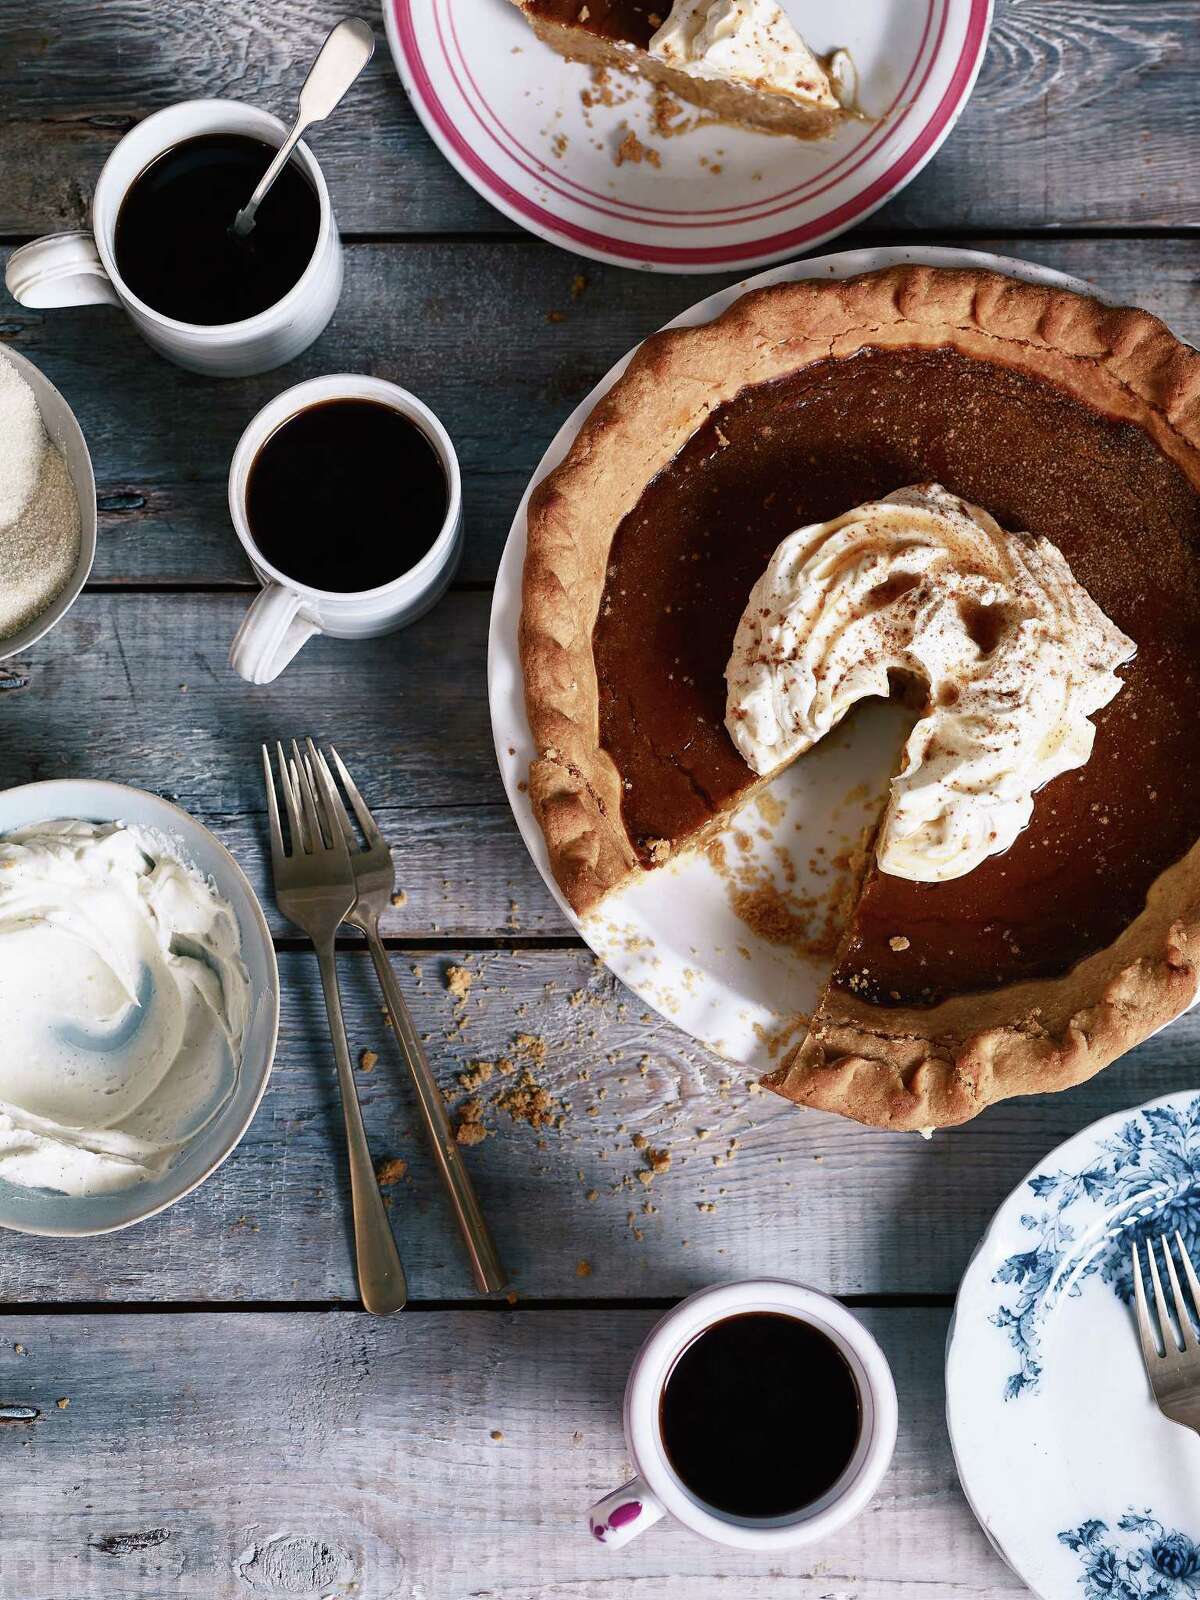 Brown Butter Salted Maple Pumpkin Pie is a rich, classic autumn-holiday offering.